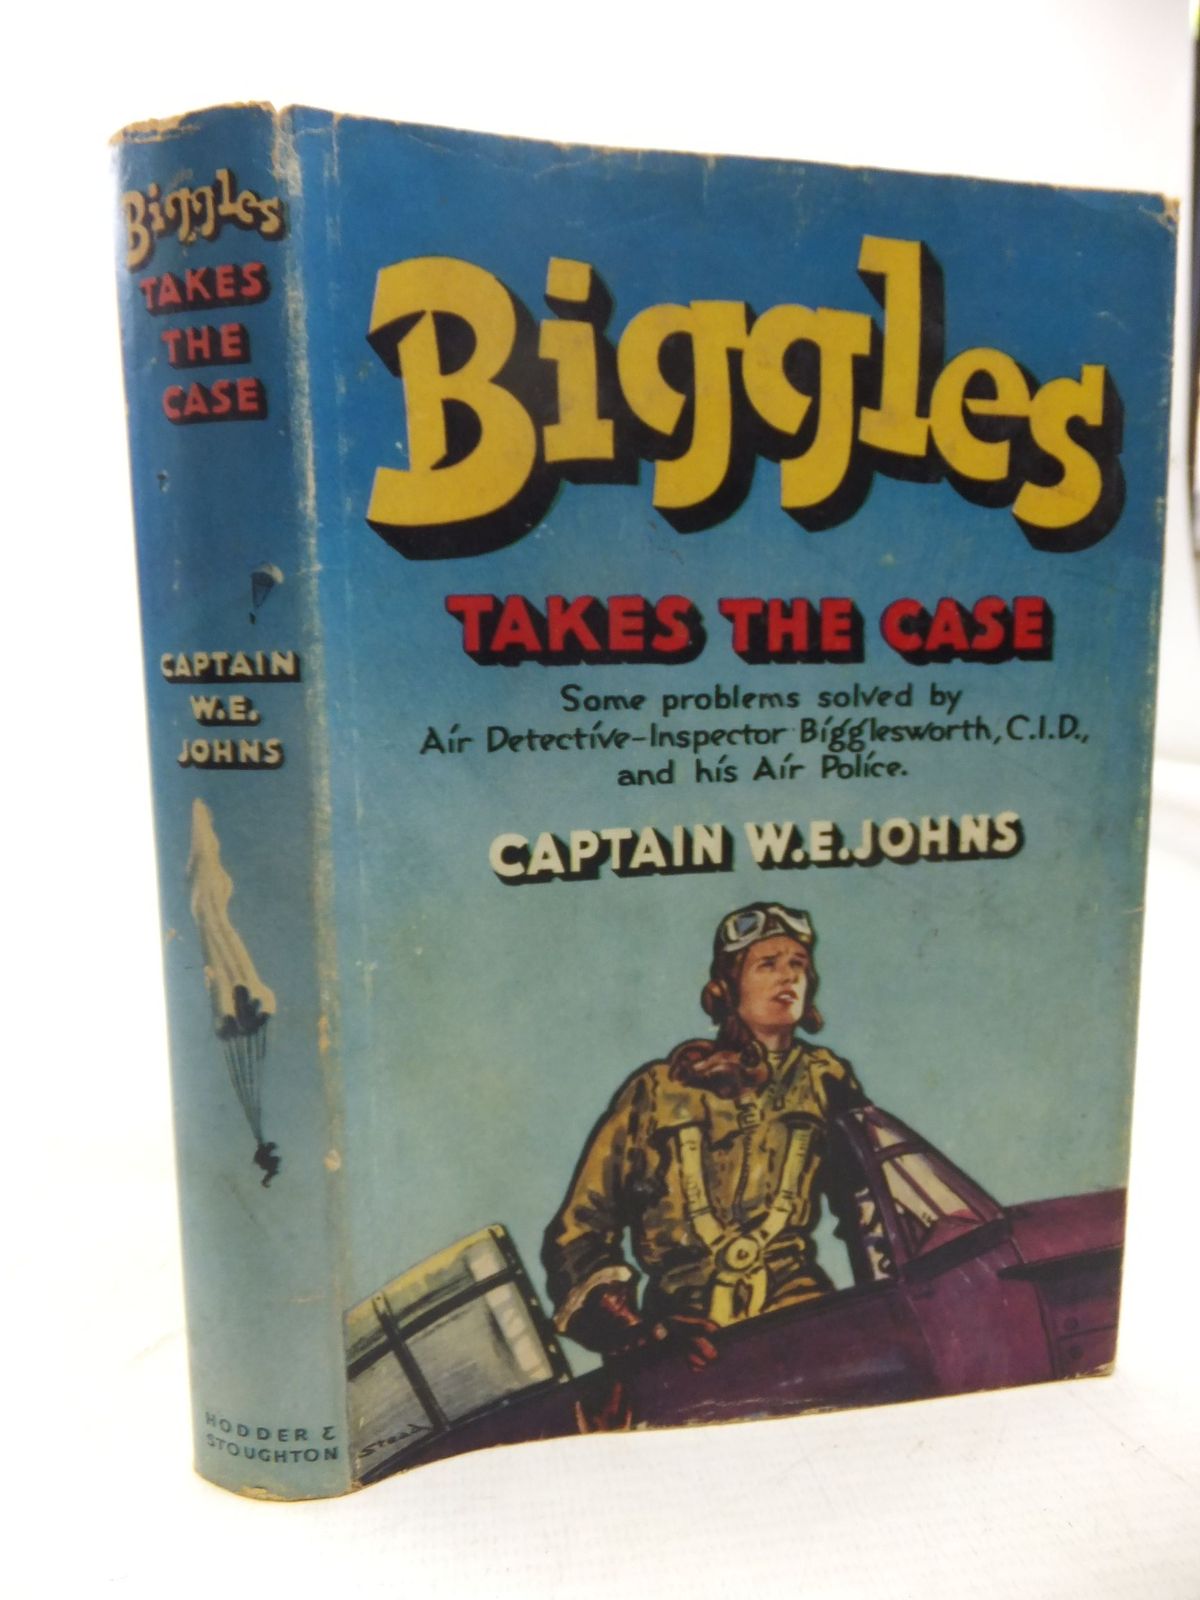 Cover of BIGGLES TAKES THE CASE by W.E. Johns